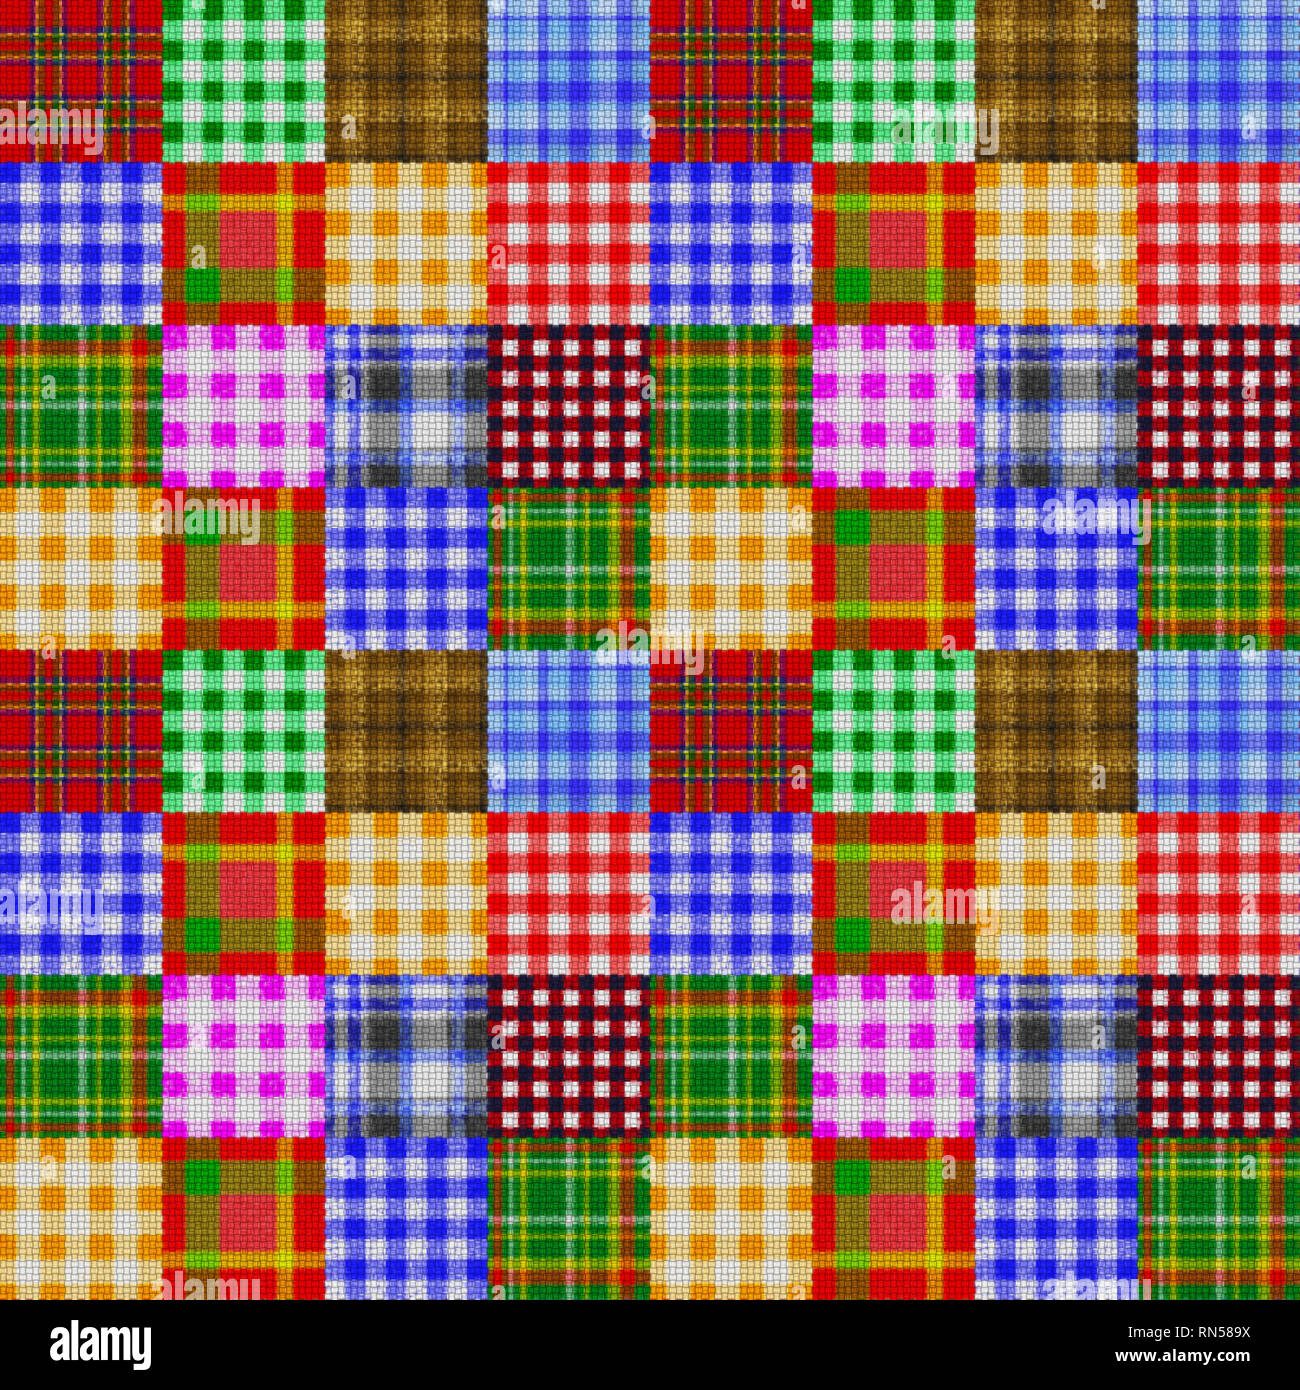 Patchwork pattern of plaid and gingham squares with a cloth weave effect seamless tile illustration Stock Photo